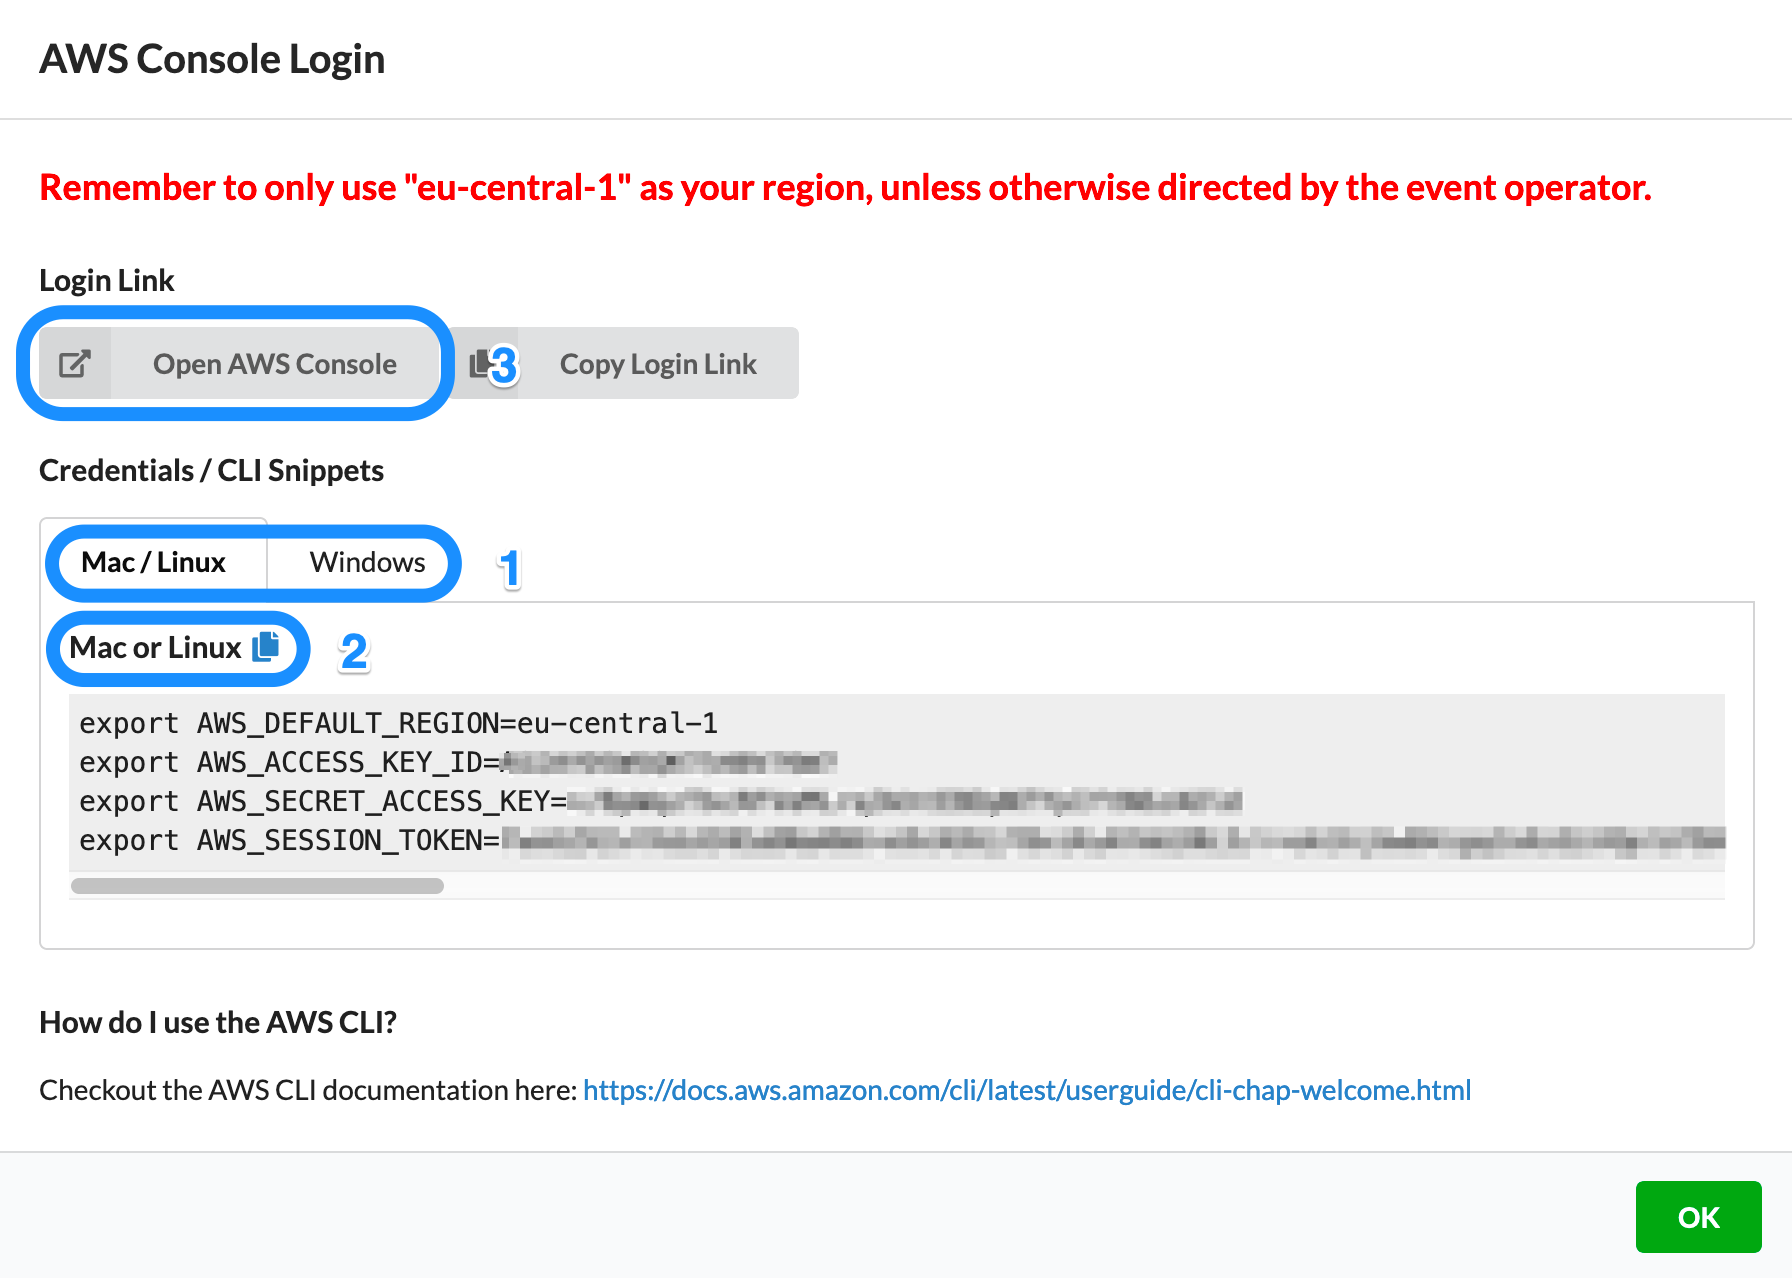 A screen capture of the Event Engine AWS Management Console login